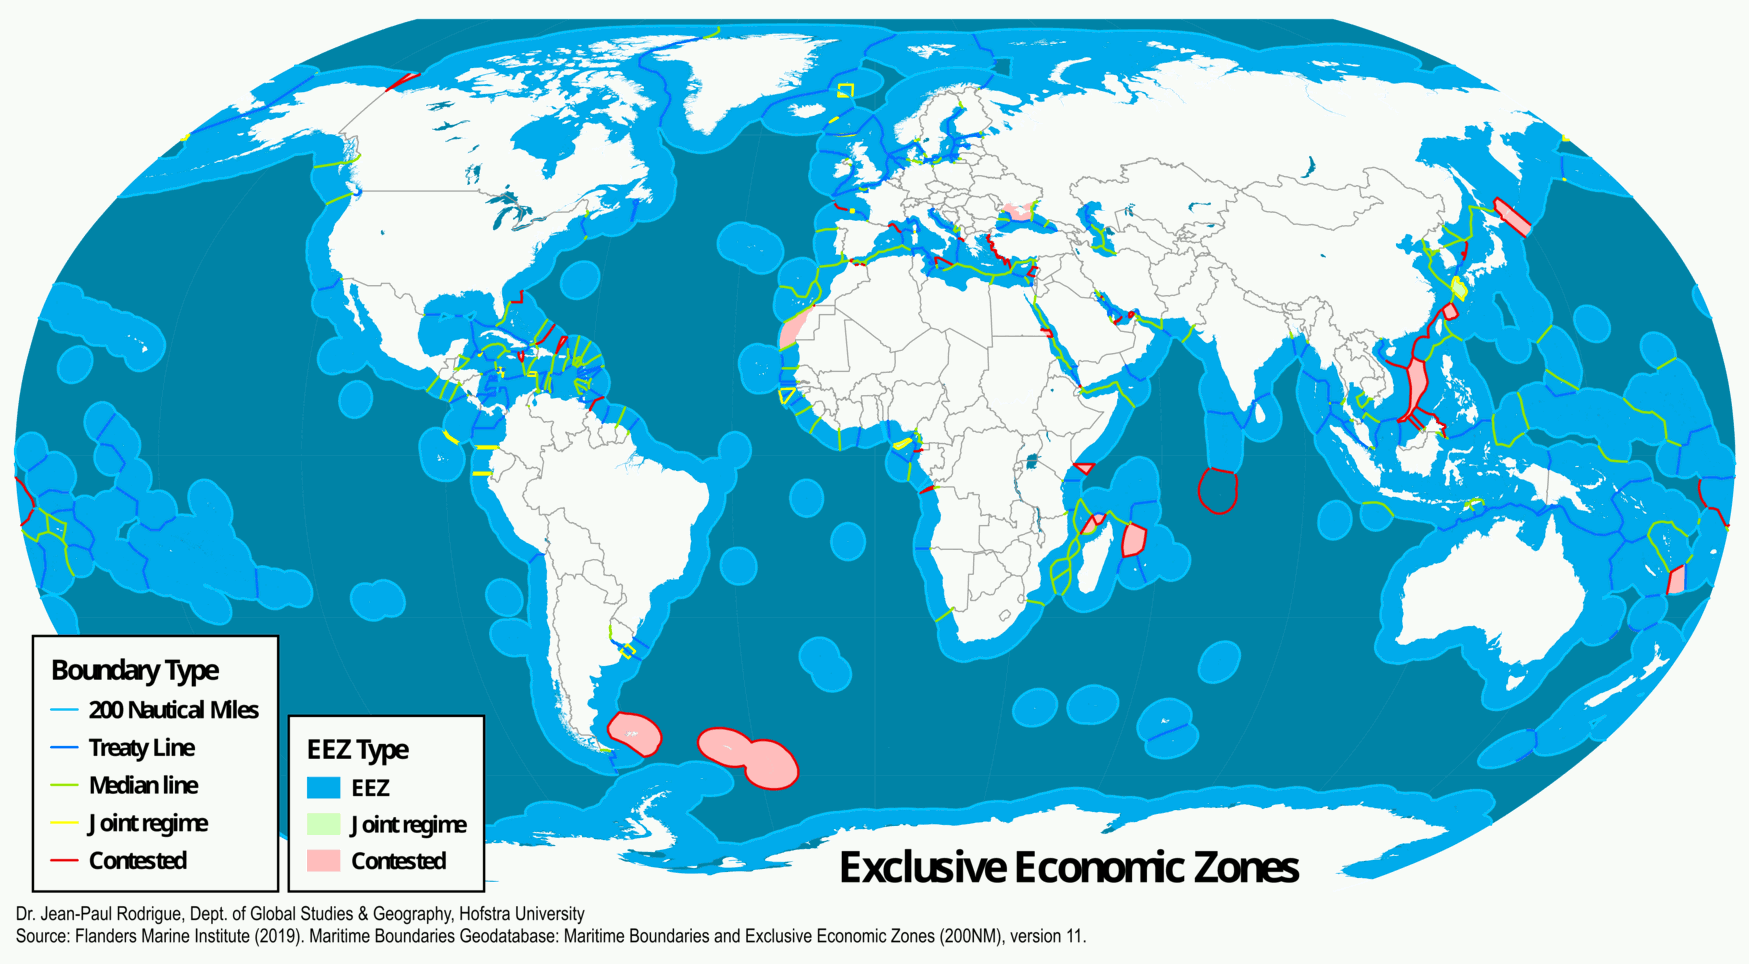 An exclusive economic zone (EEZ), as prescribed by the 1982 United Nations Convention on the Law of the Sea, is an area of the sea in which a sovereign state has exclusive rights regarding the exploration and use of marine resources, including energy production from water and wind. EEZ does not define the ownership of any maritime features (islands, rocks and low-tide elevations) within the EEZ. It stretches from the outer limit of the territorial sea (22.224 kilometres or 12 nmi from the baseline) out 370.4 kilometres (or 200 nautical miles) from the coast of the state in question. It is also referred to as a maritime continental margin and, in colloquial usage, may include the continental shelf. The term does not include either the territorial sea or the continental shelf beyond the 200 nautical mile limit. The difference between the territorial sea and the exclusive economic zone is that the first confers full sovereignty over the waters, whereas the second is merely a "sovereign right" which refers to the coastal state's rights below the surface of the sea. The surface waters are international waters.